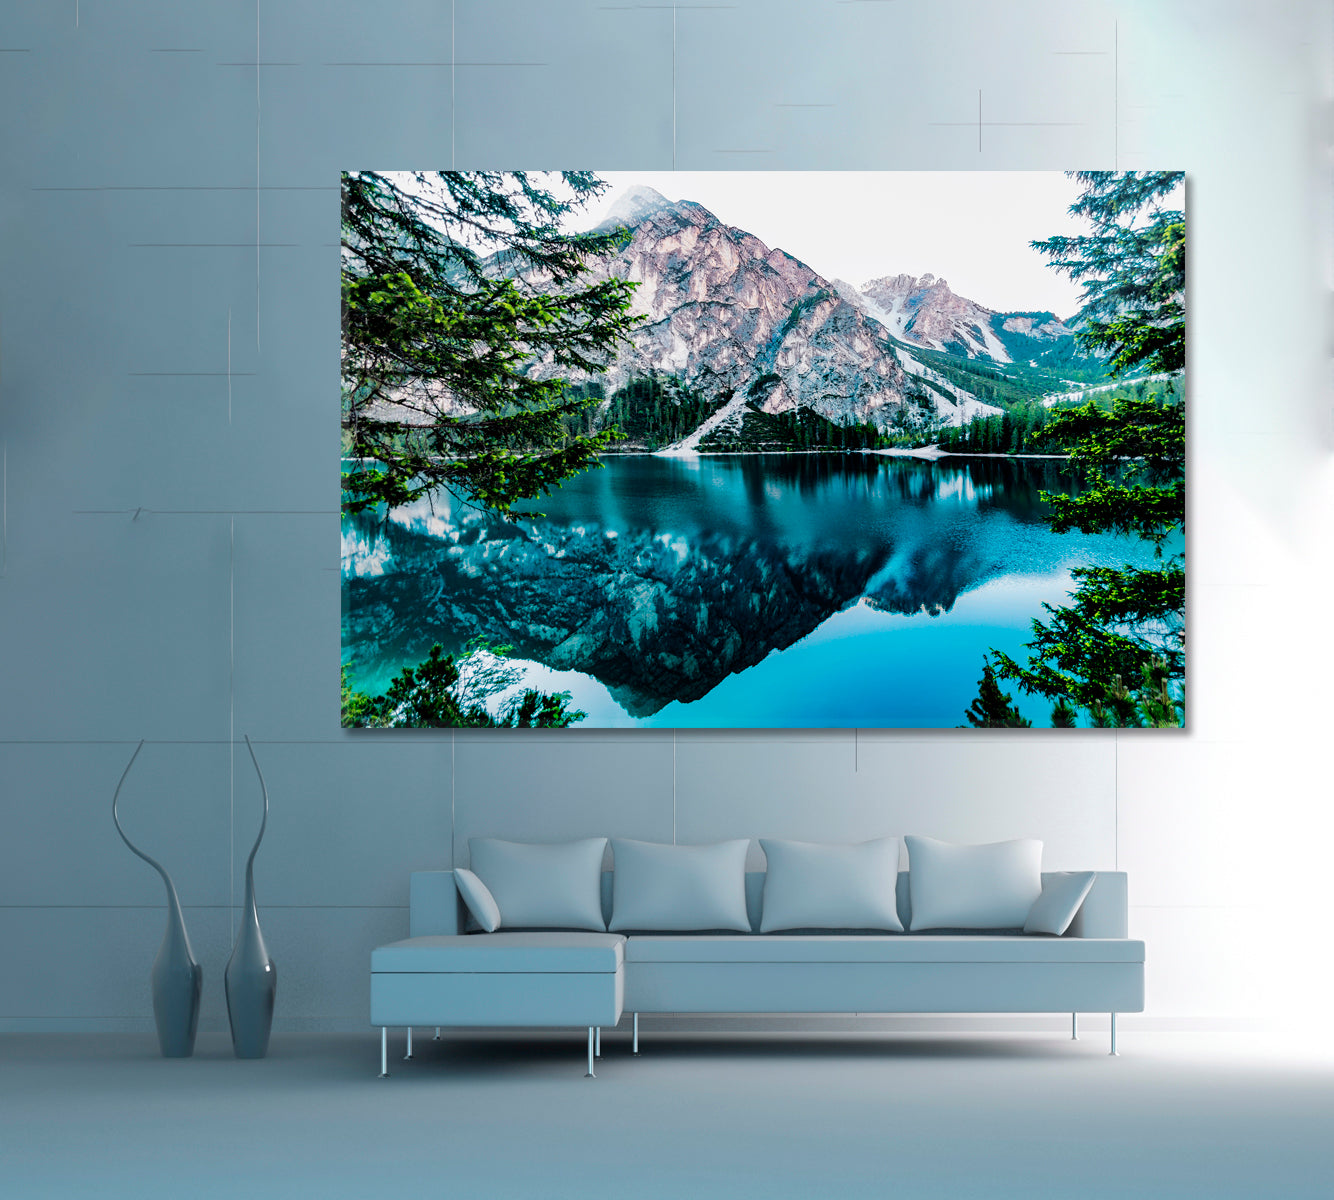 Mountain Trees and Iconic Moraine Lake Banff National Park Nature Wall Canvas Print Artesty 1 panel 24" x 16" 